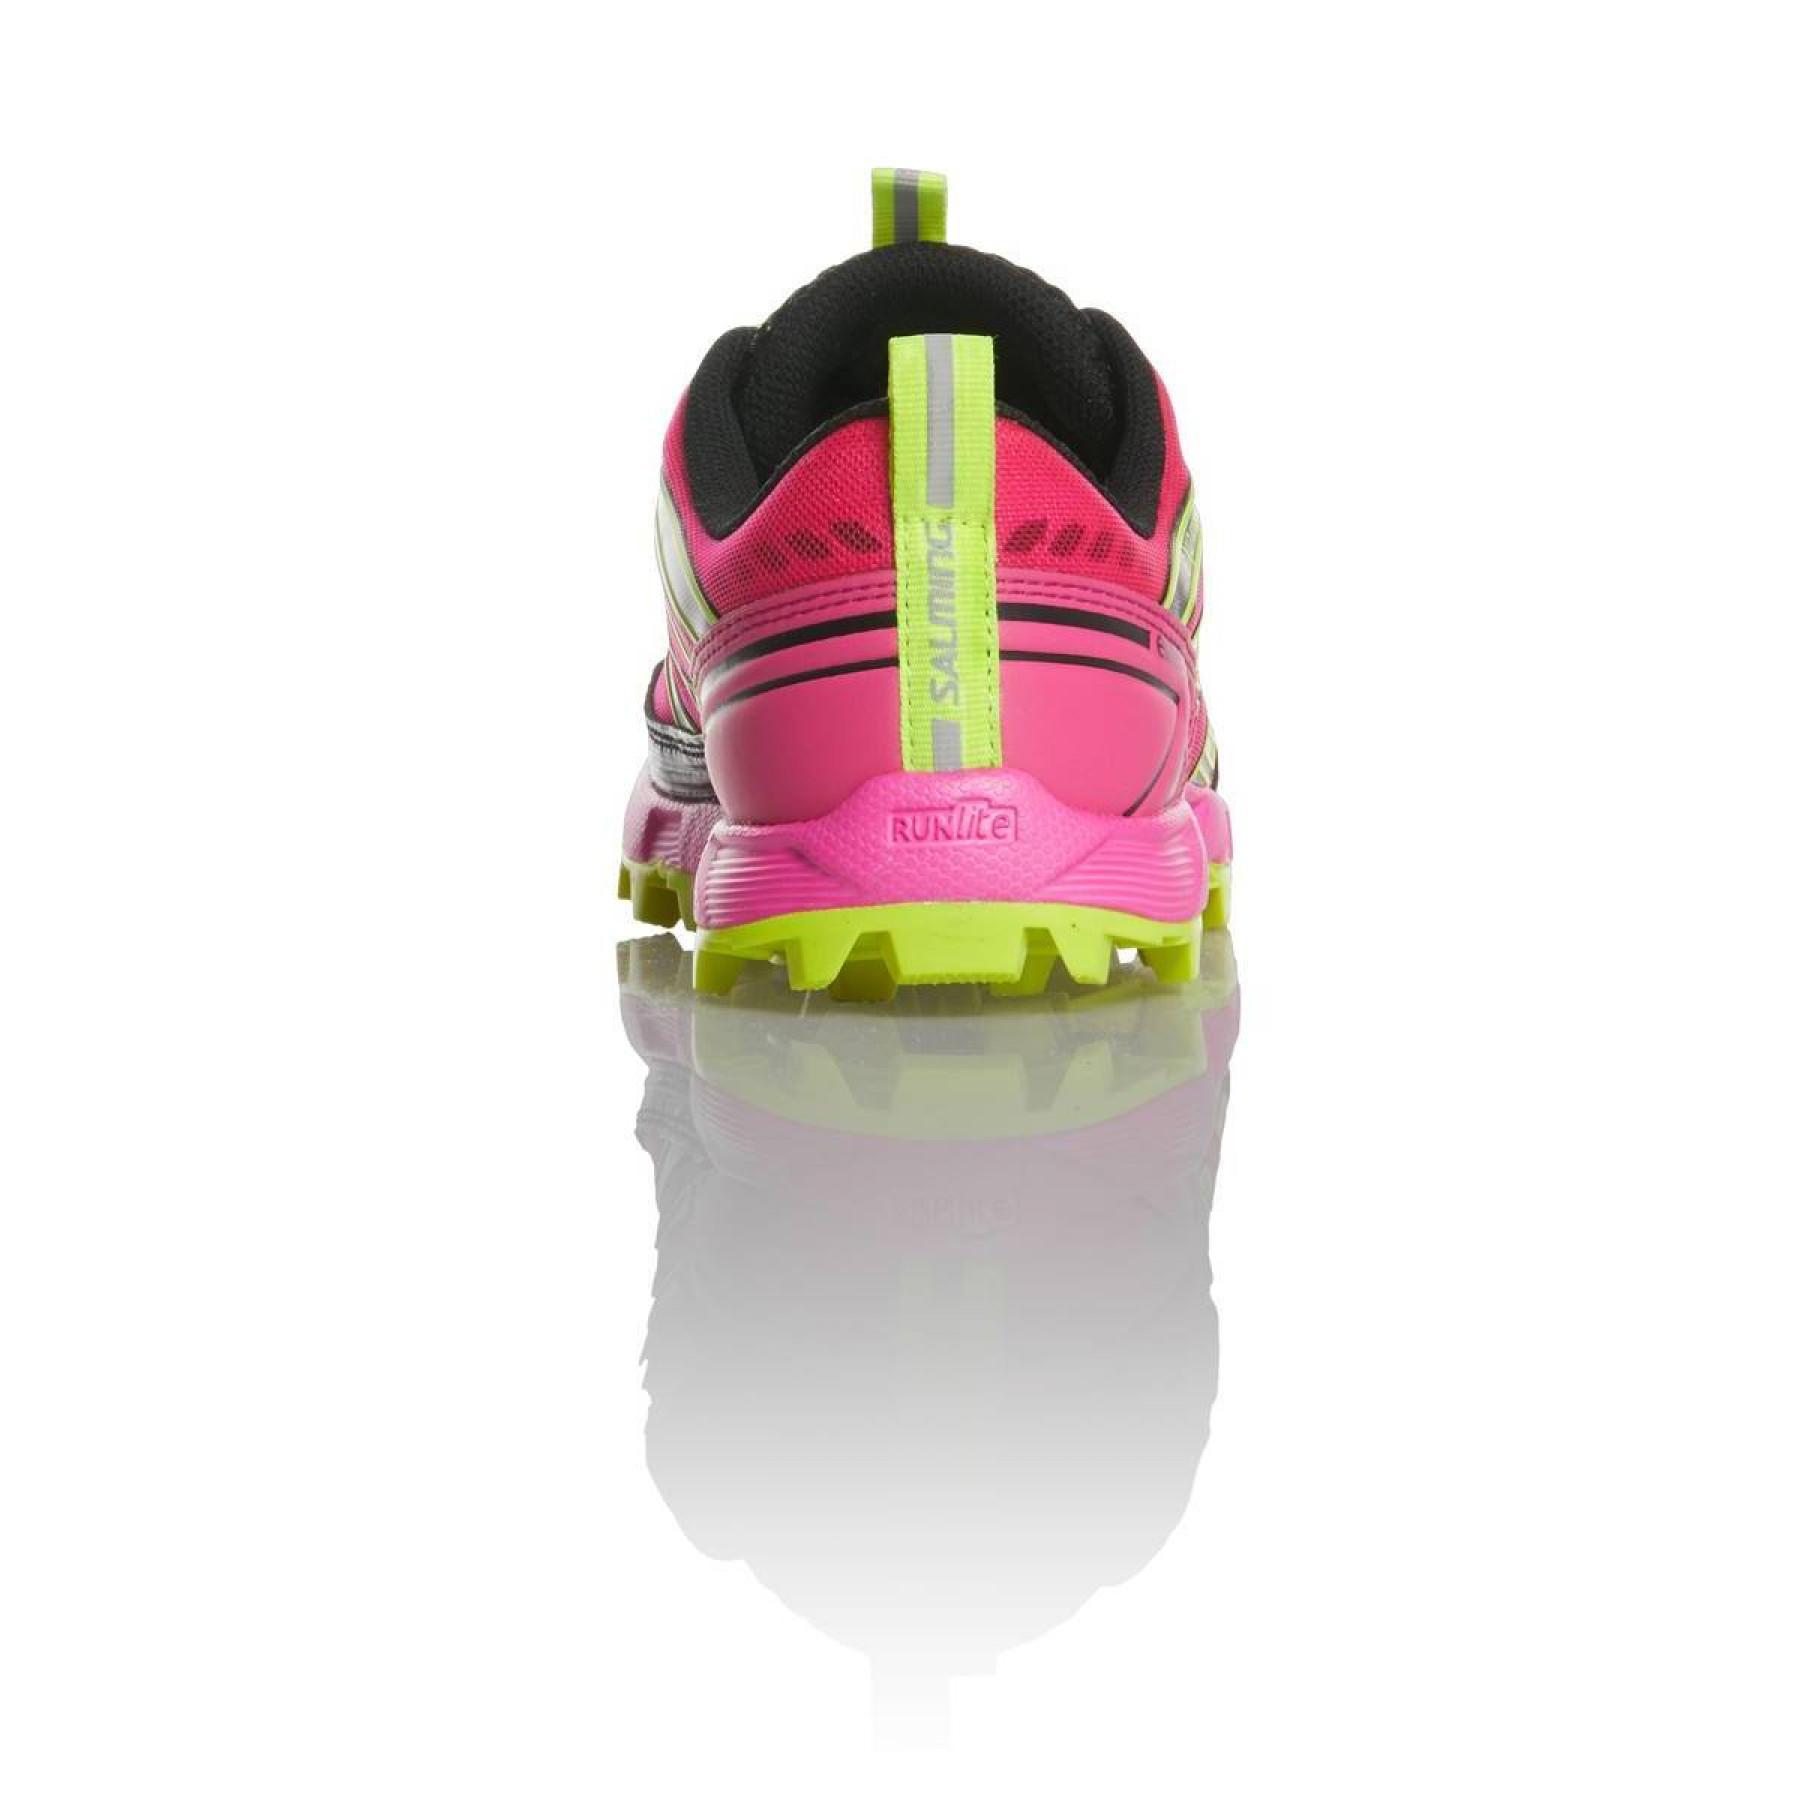 Women's Trail running shoes Salming elements